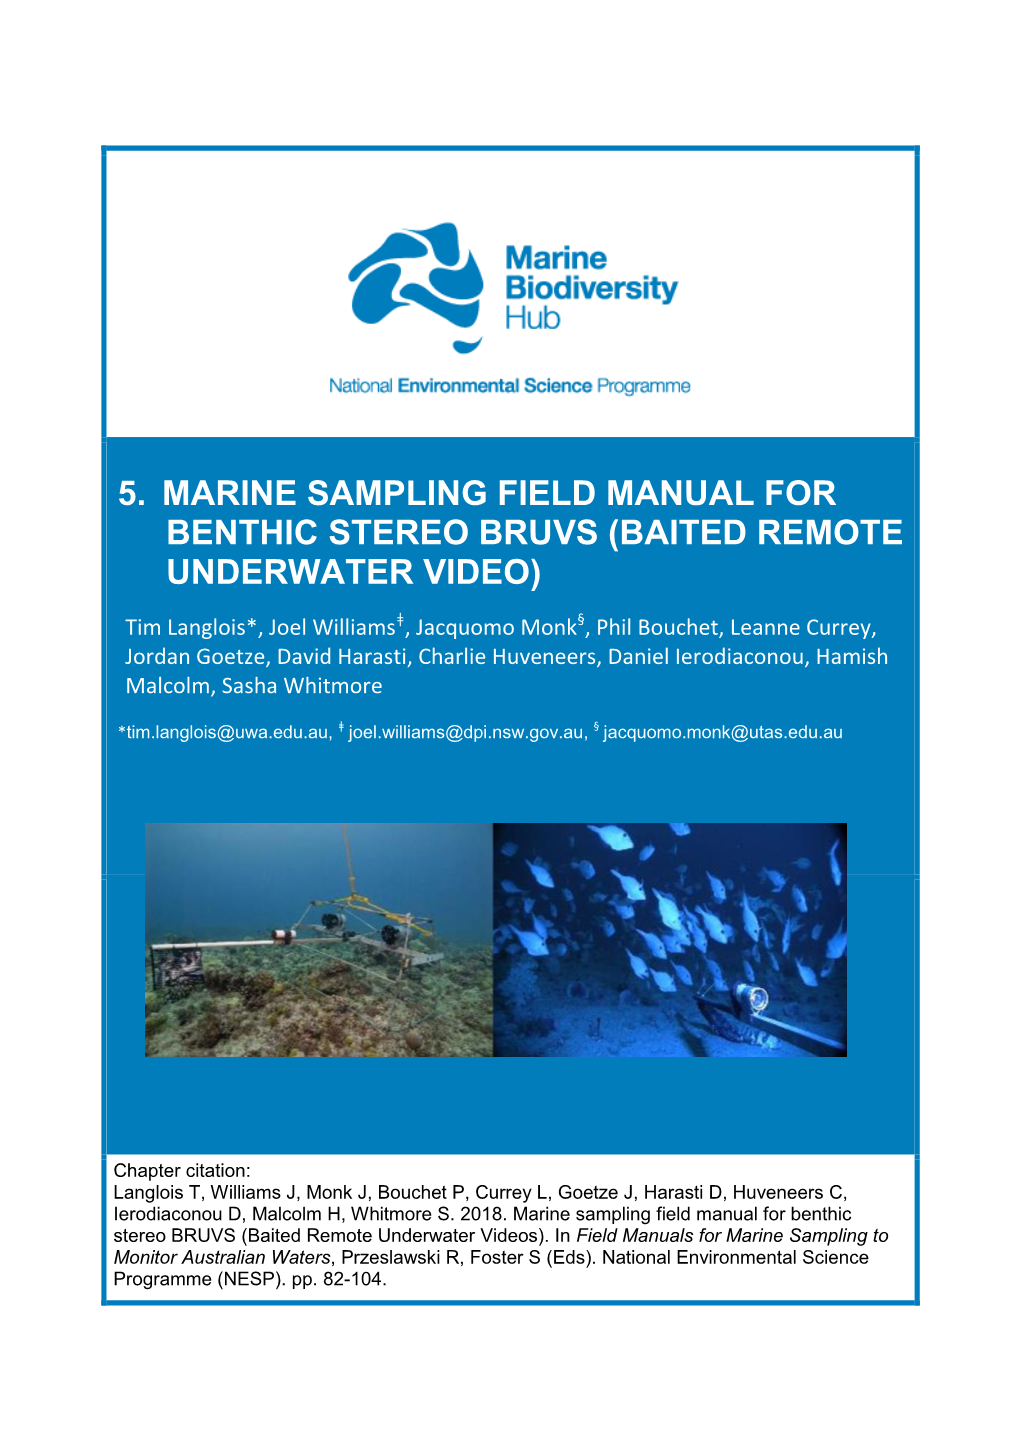 5. Marine Sampling Field Manual for Benthic Stereo Bruvs (Baited Remote Underwater Video)